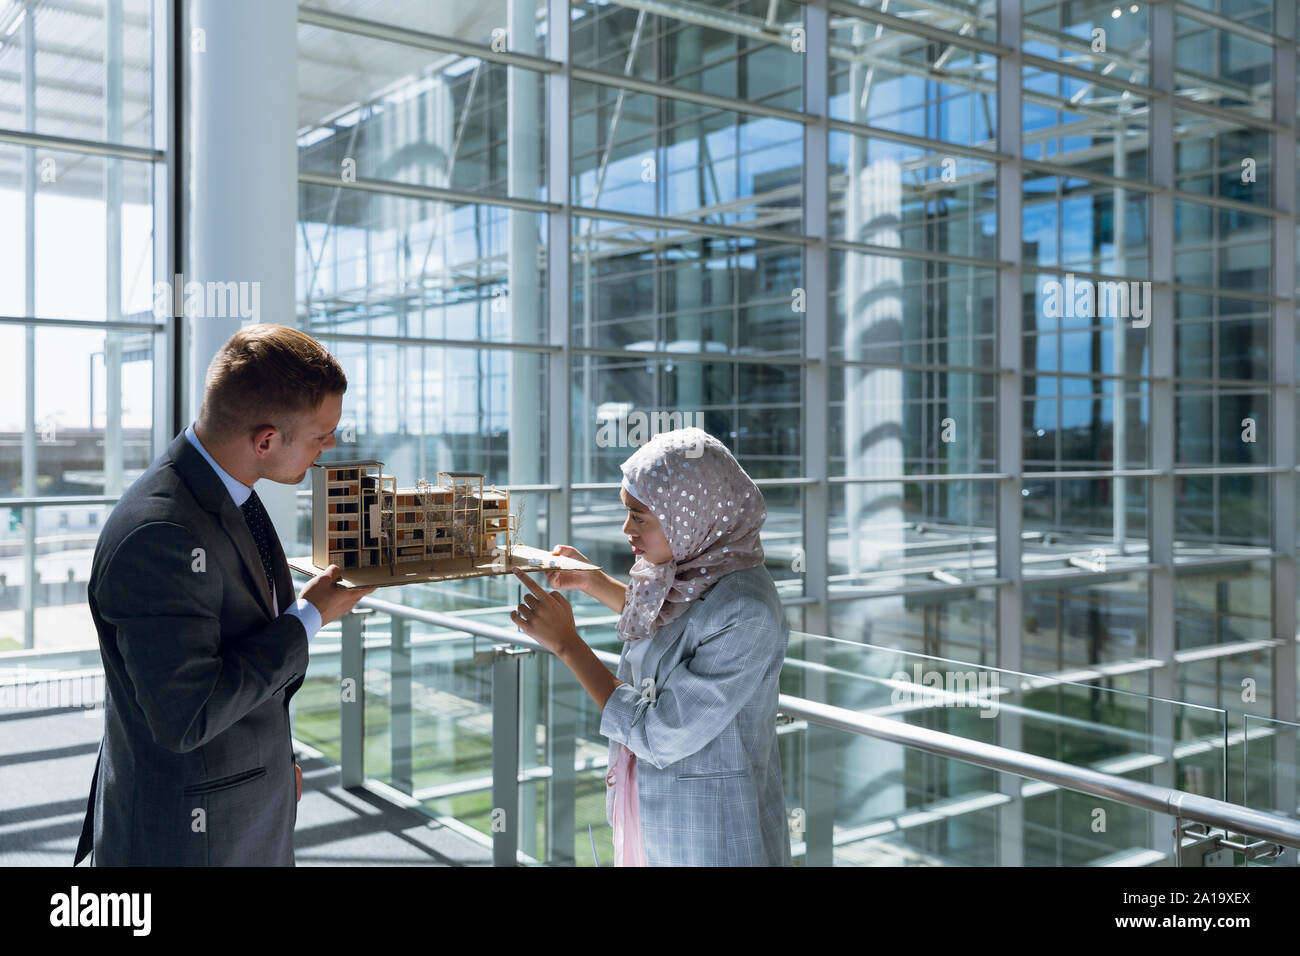 Male and female architects discussing over construction project in office Stock Photo